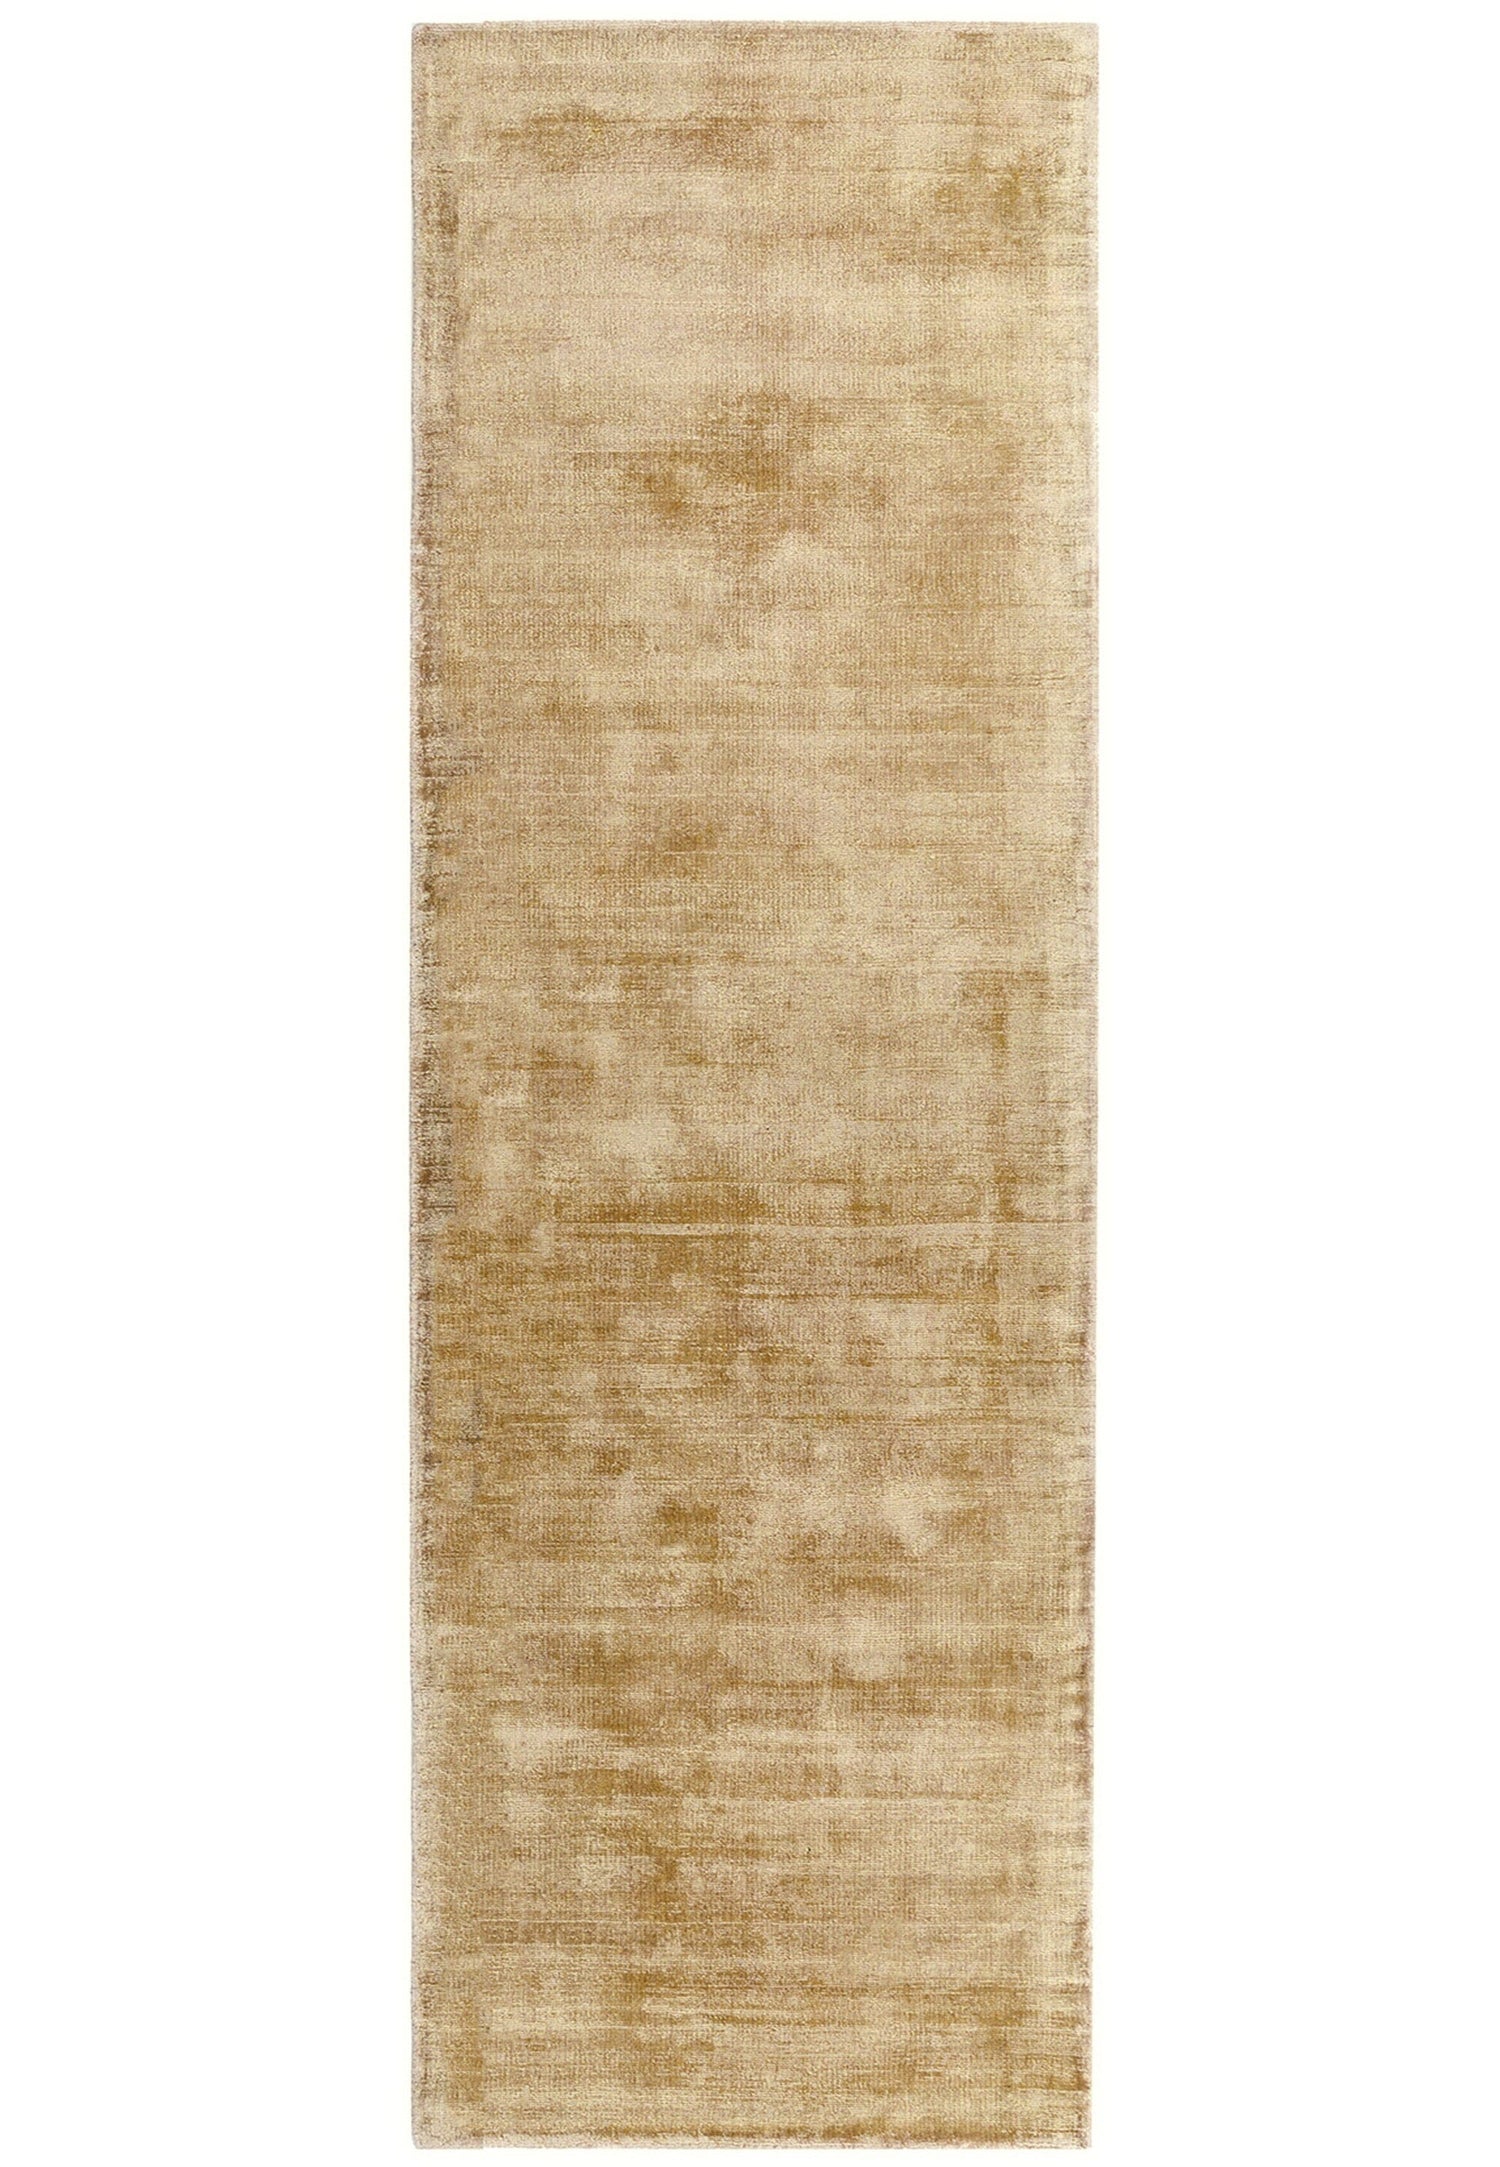  Asiatic Carpets-Asiatic Carpets Blade Hand Woven Runner Soft Gold - 66 x 240cm-Yellow, Gold 149 